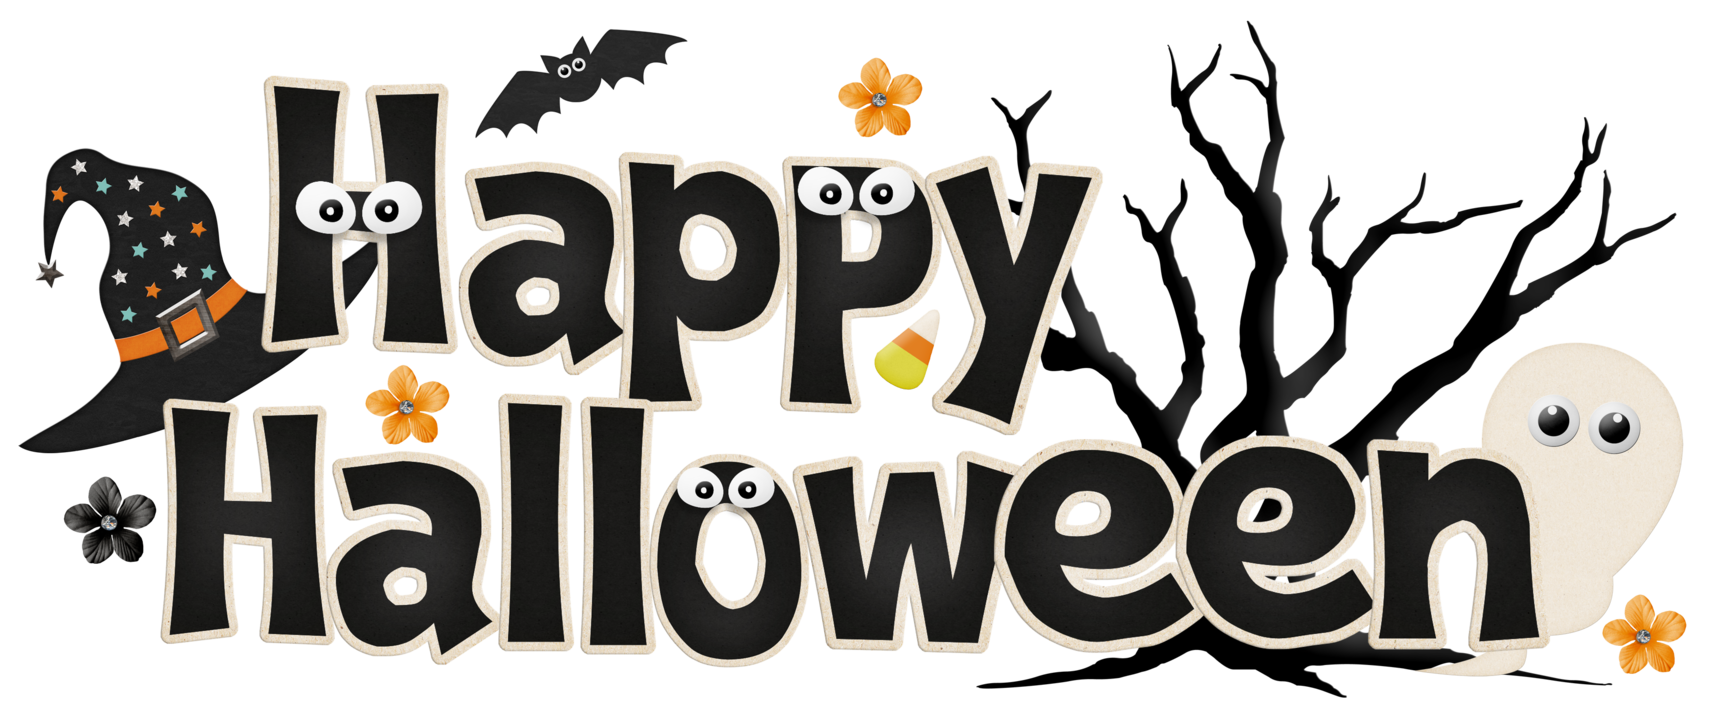 free halloween party clipart - photo #49